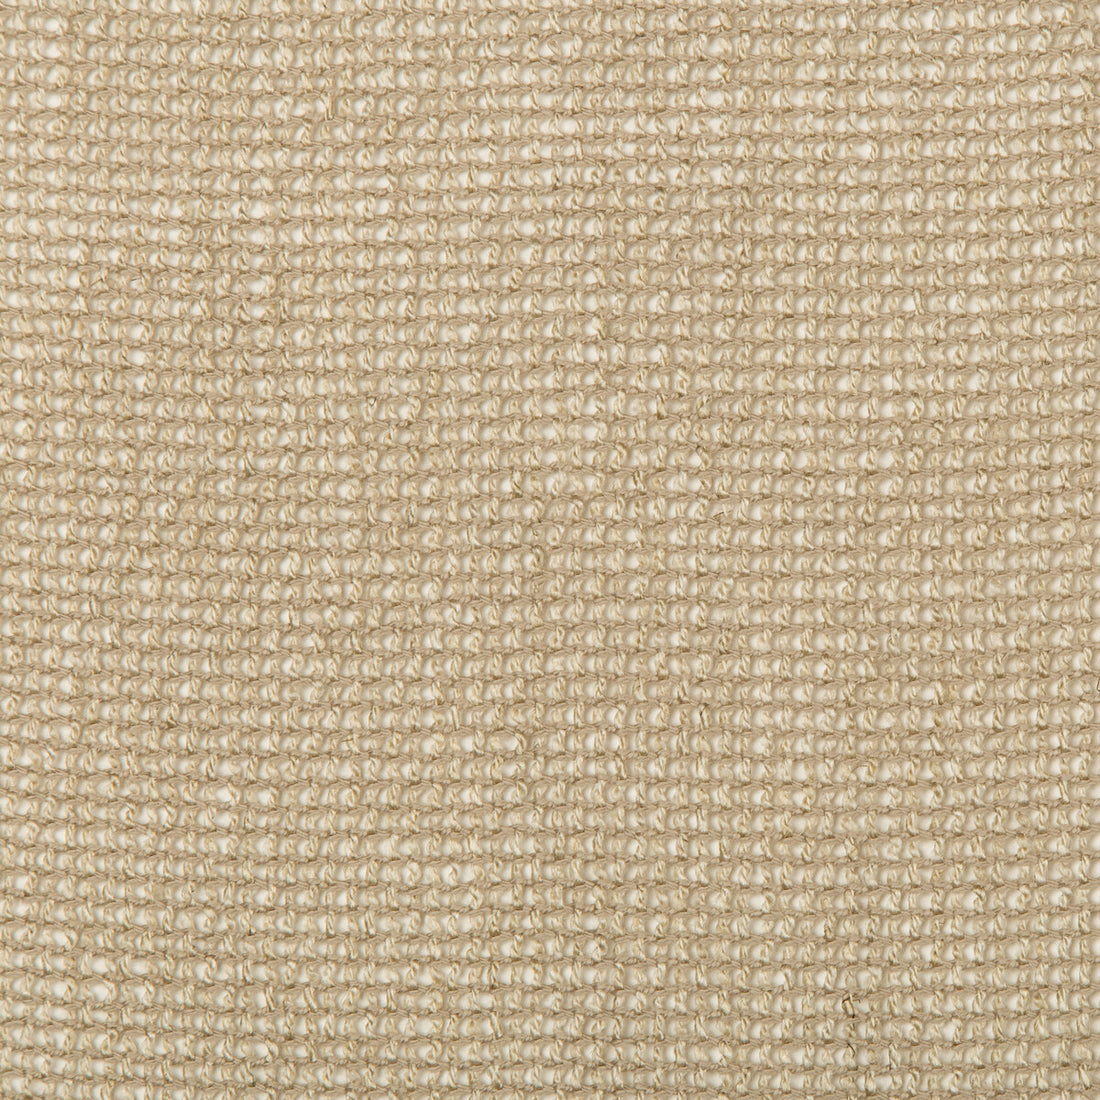 Kearns fabric in linen color - pattern 4633.16.0 - by Kravet Design in the Barclay Butera Sagamore collection